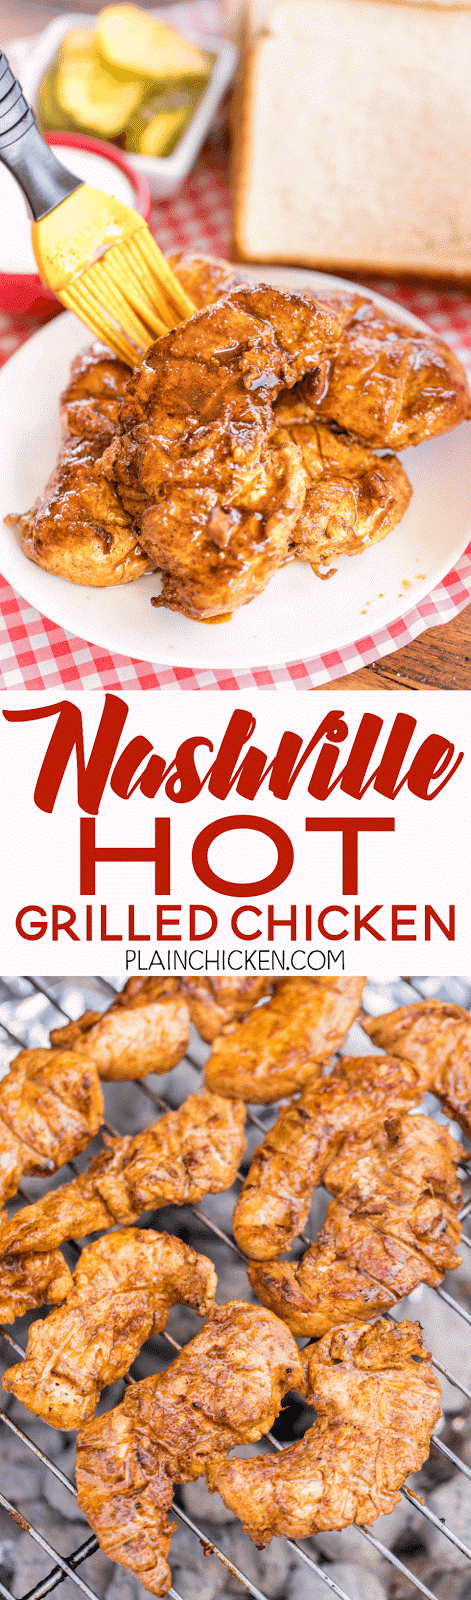 Nashville Hot Grilled Chicken - grilled version of the best spicy chicken around. Chicken marinated in cayenne pepper, brown sugar, chili powder, paprika, garlic powder and olive oil. Reserve some of the marinade to brush on the cooked chicken if you want it really HOT! Seriously THE BEST grilled chicken recipe! Serve with pickles, ranch and white bread! We are making this again this weekend - SO GOOD!